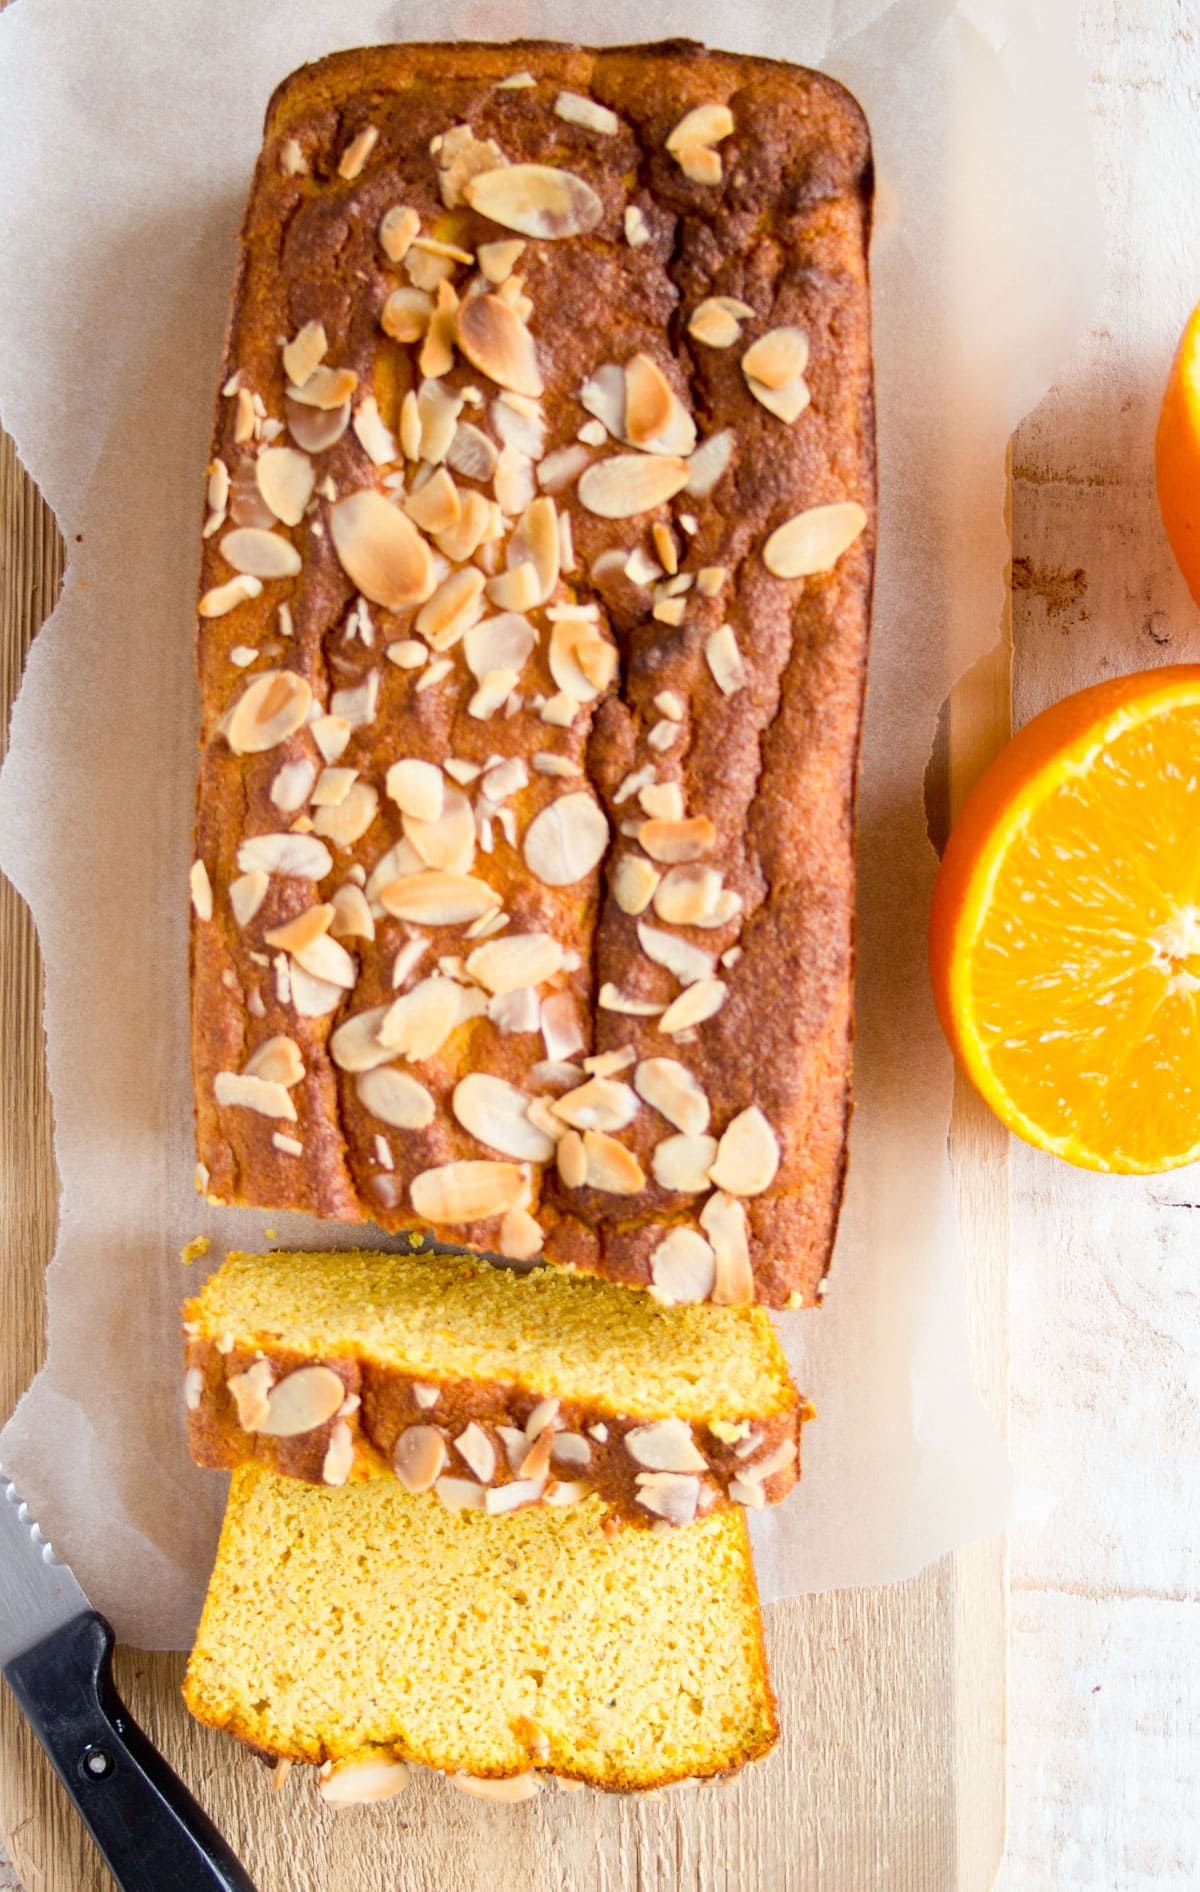 A rectangular loaf cake topped with almonds and halved oranges on the side.